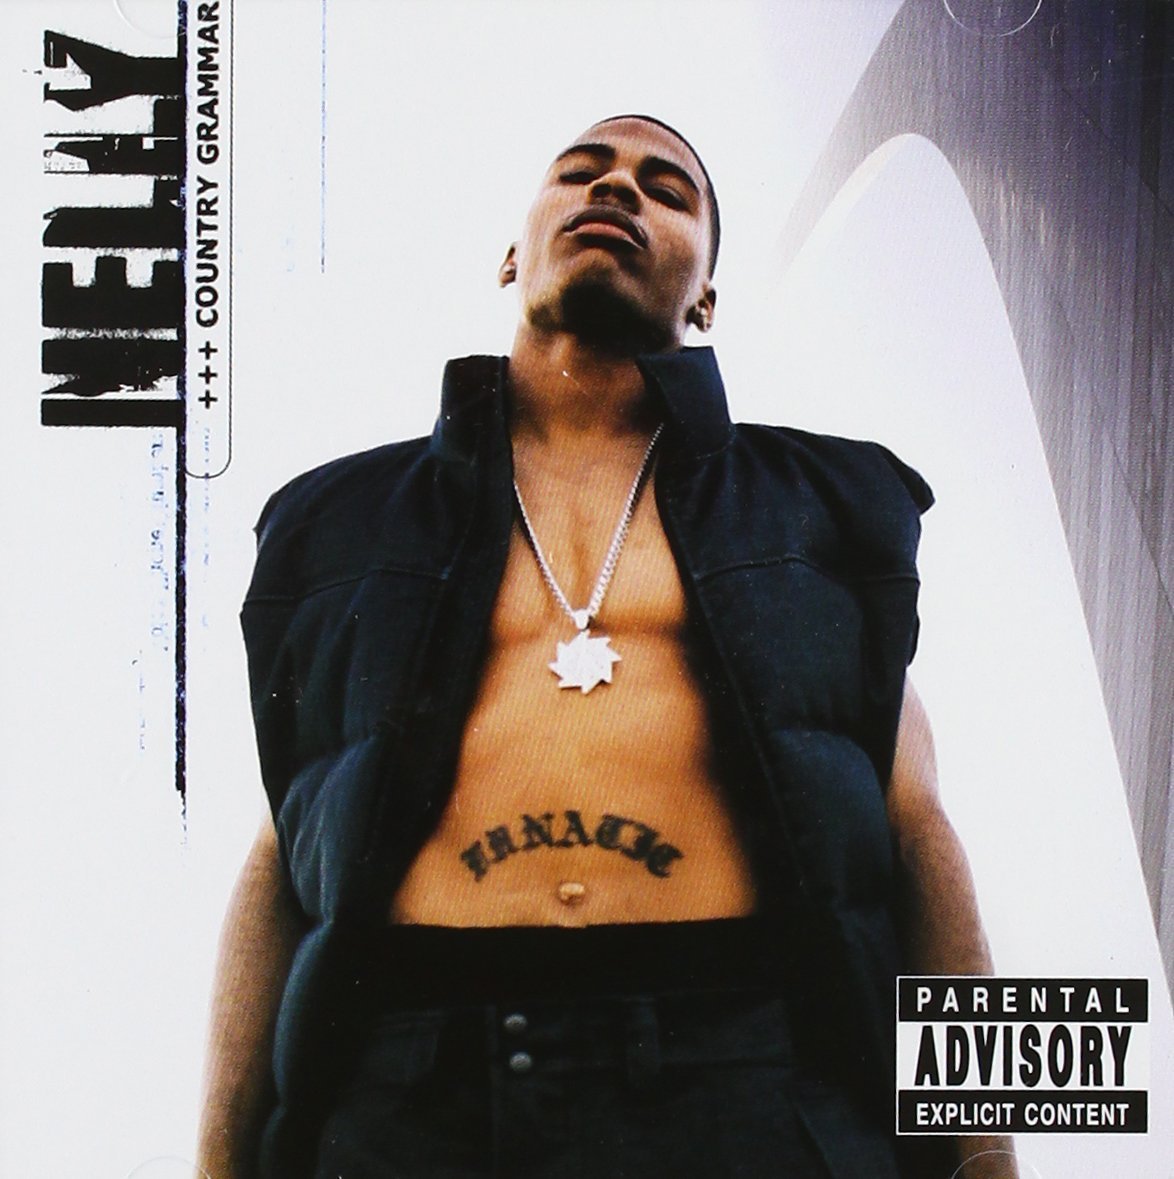 RT @J_Credible: .@Nelly_Mo’s ‘Country Grammar’ becomes 8th hip-hop album to go DIAMOND ???? - https://t.co/jVx0xgbkhP https://t.co/Q7bpsibeUa